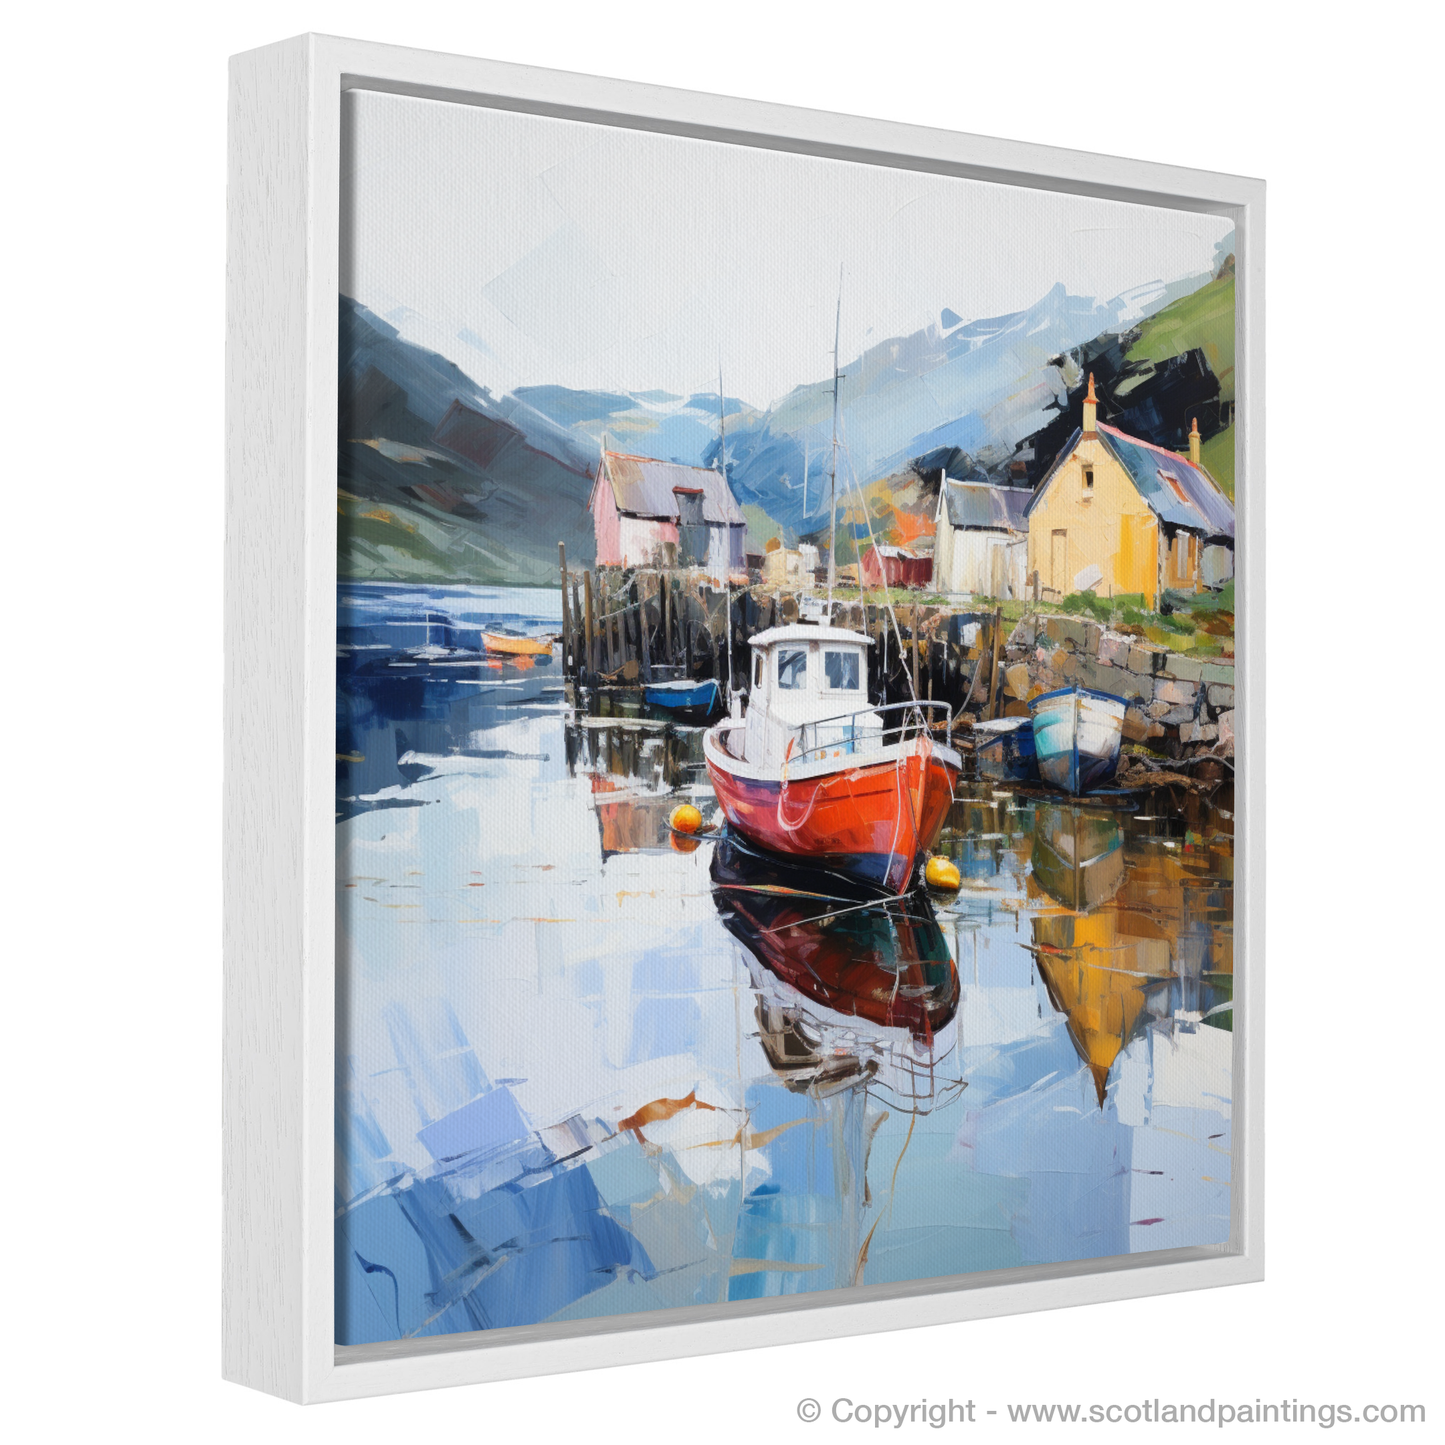 Painting and Art Print of Tayvallich Harbour, Argyll entitled "Expressionist Elegance of Tayvallich Harbour".